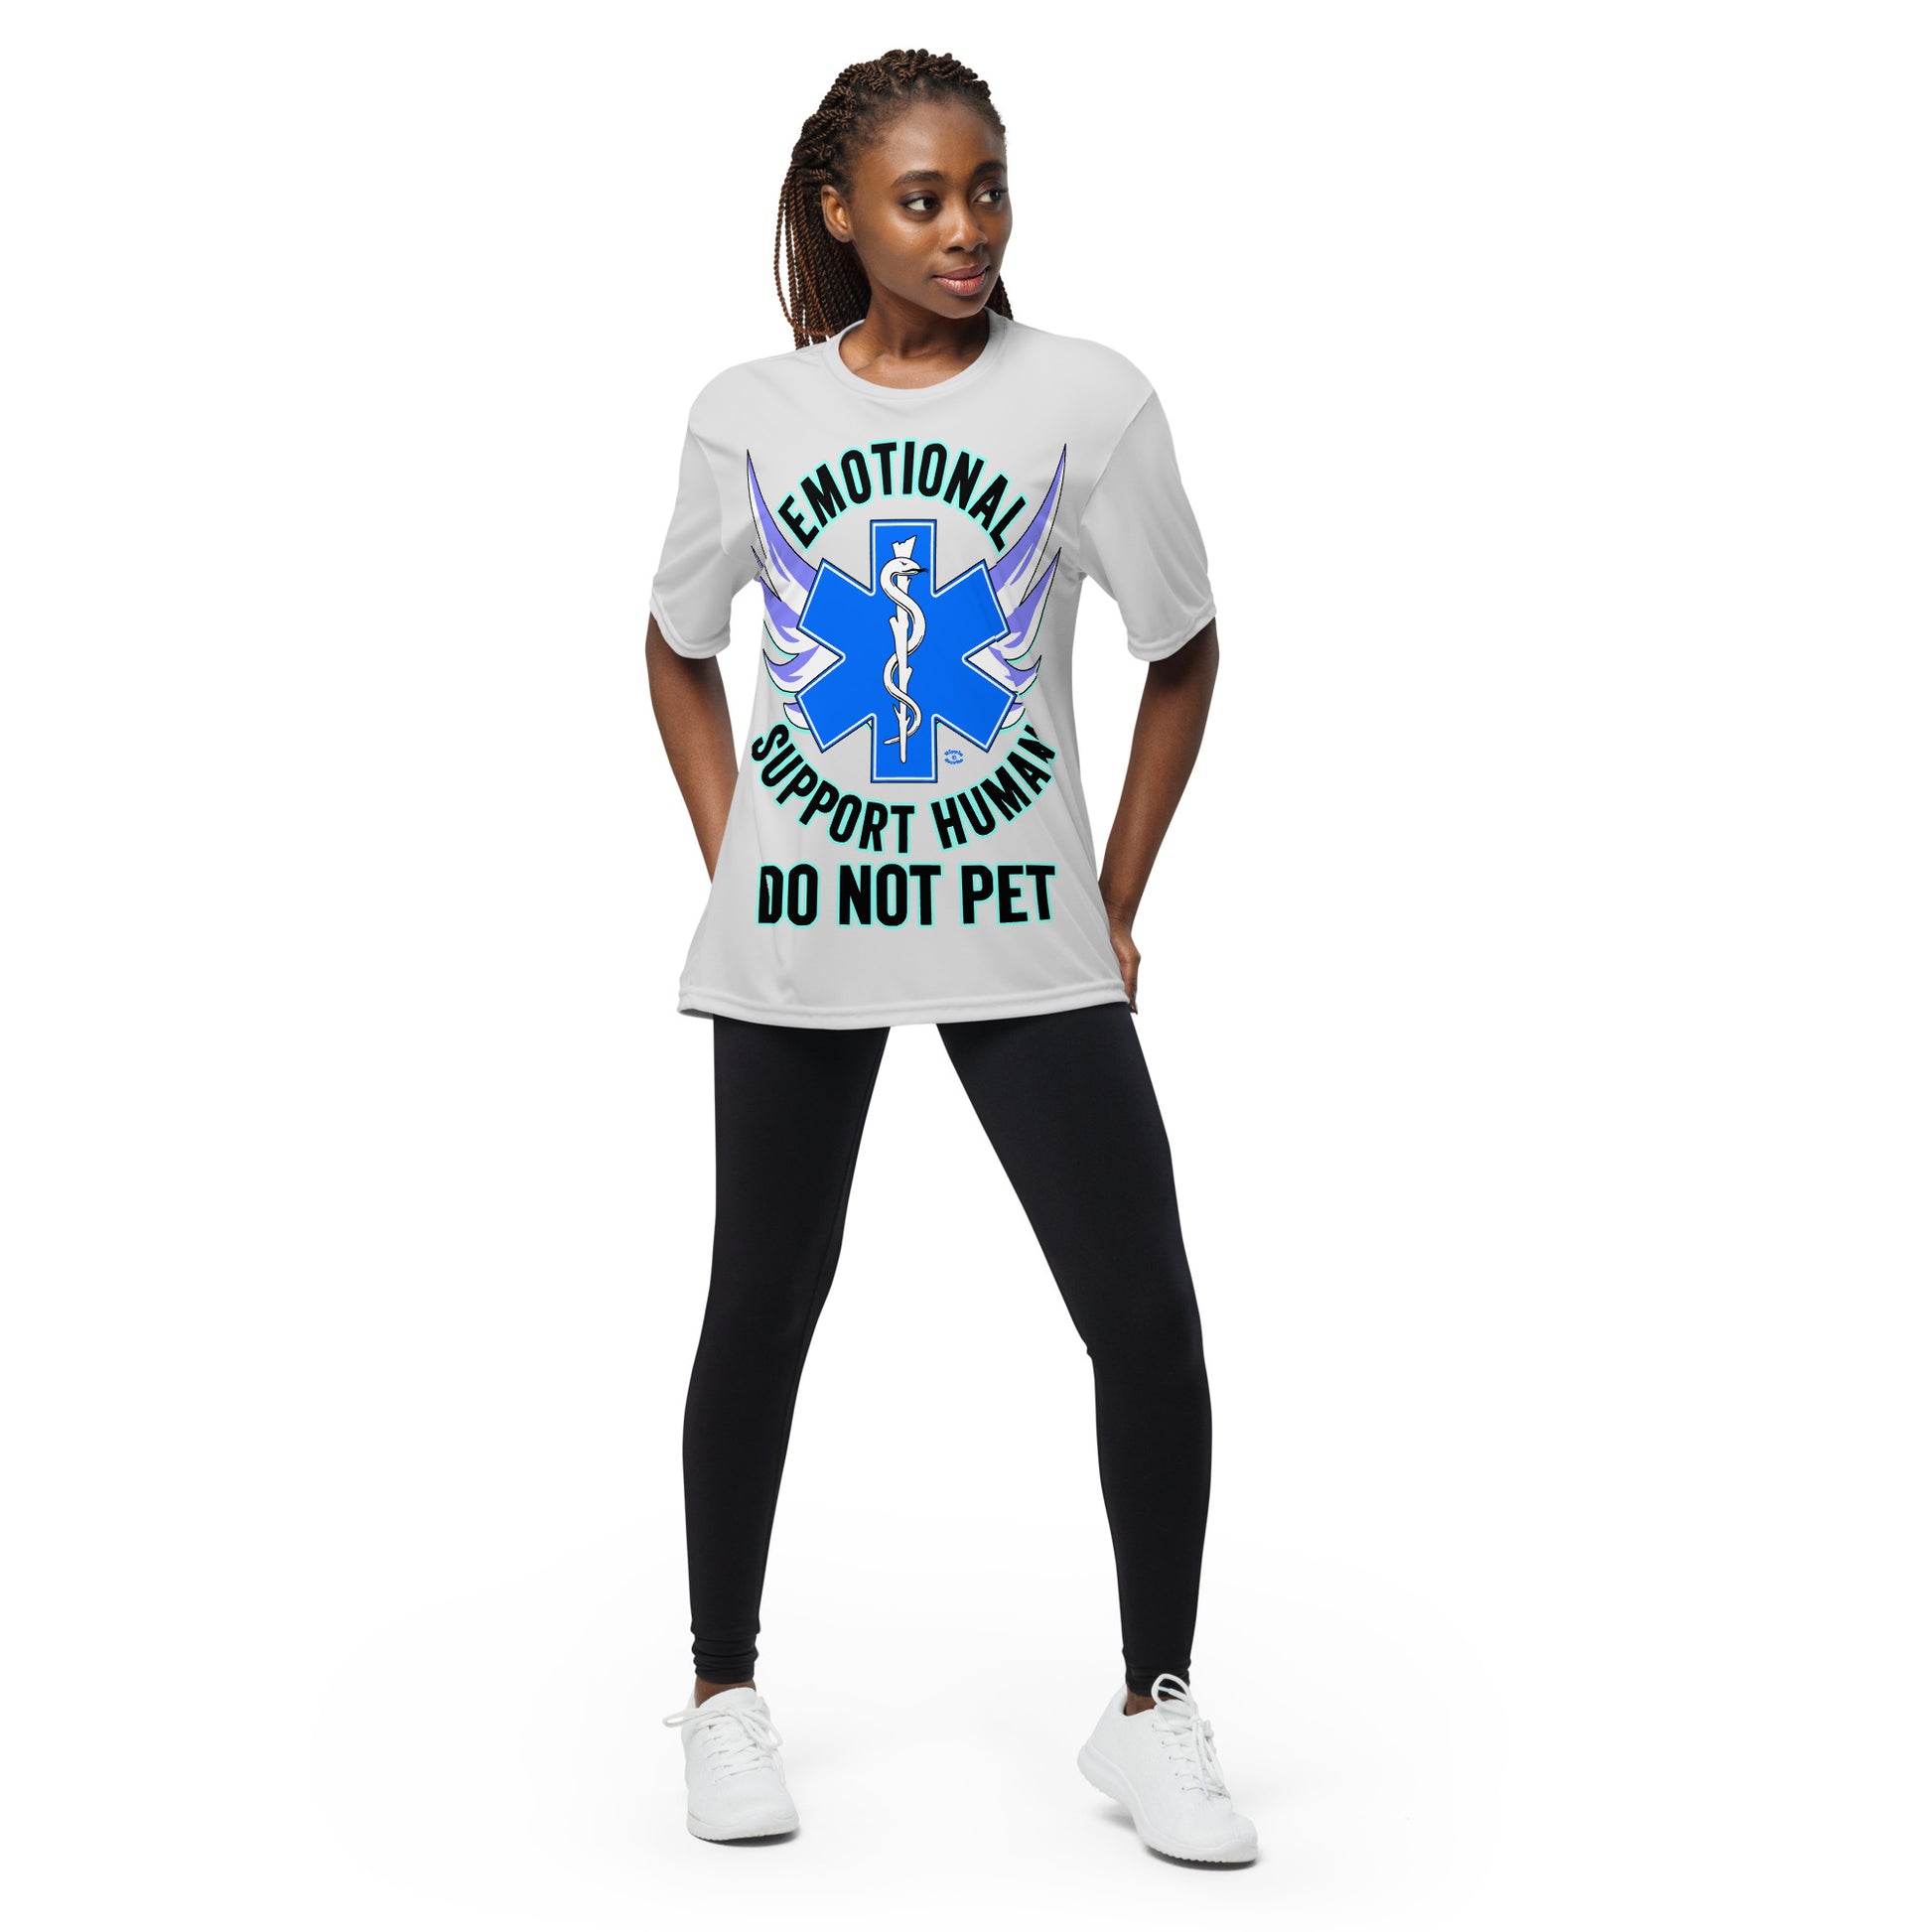 A woman wearing a tshirt with a big blue cross and a Rod of Asclepius inside. Text around the cross says Emotional Support Human DO NOT PET - silver